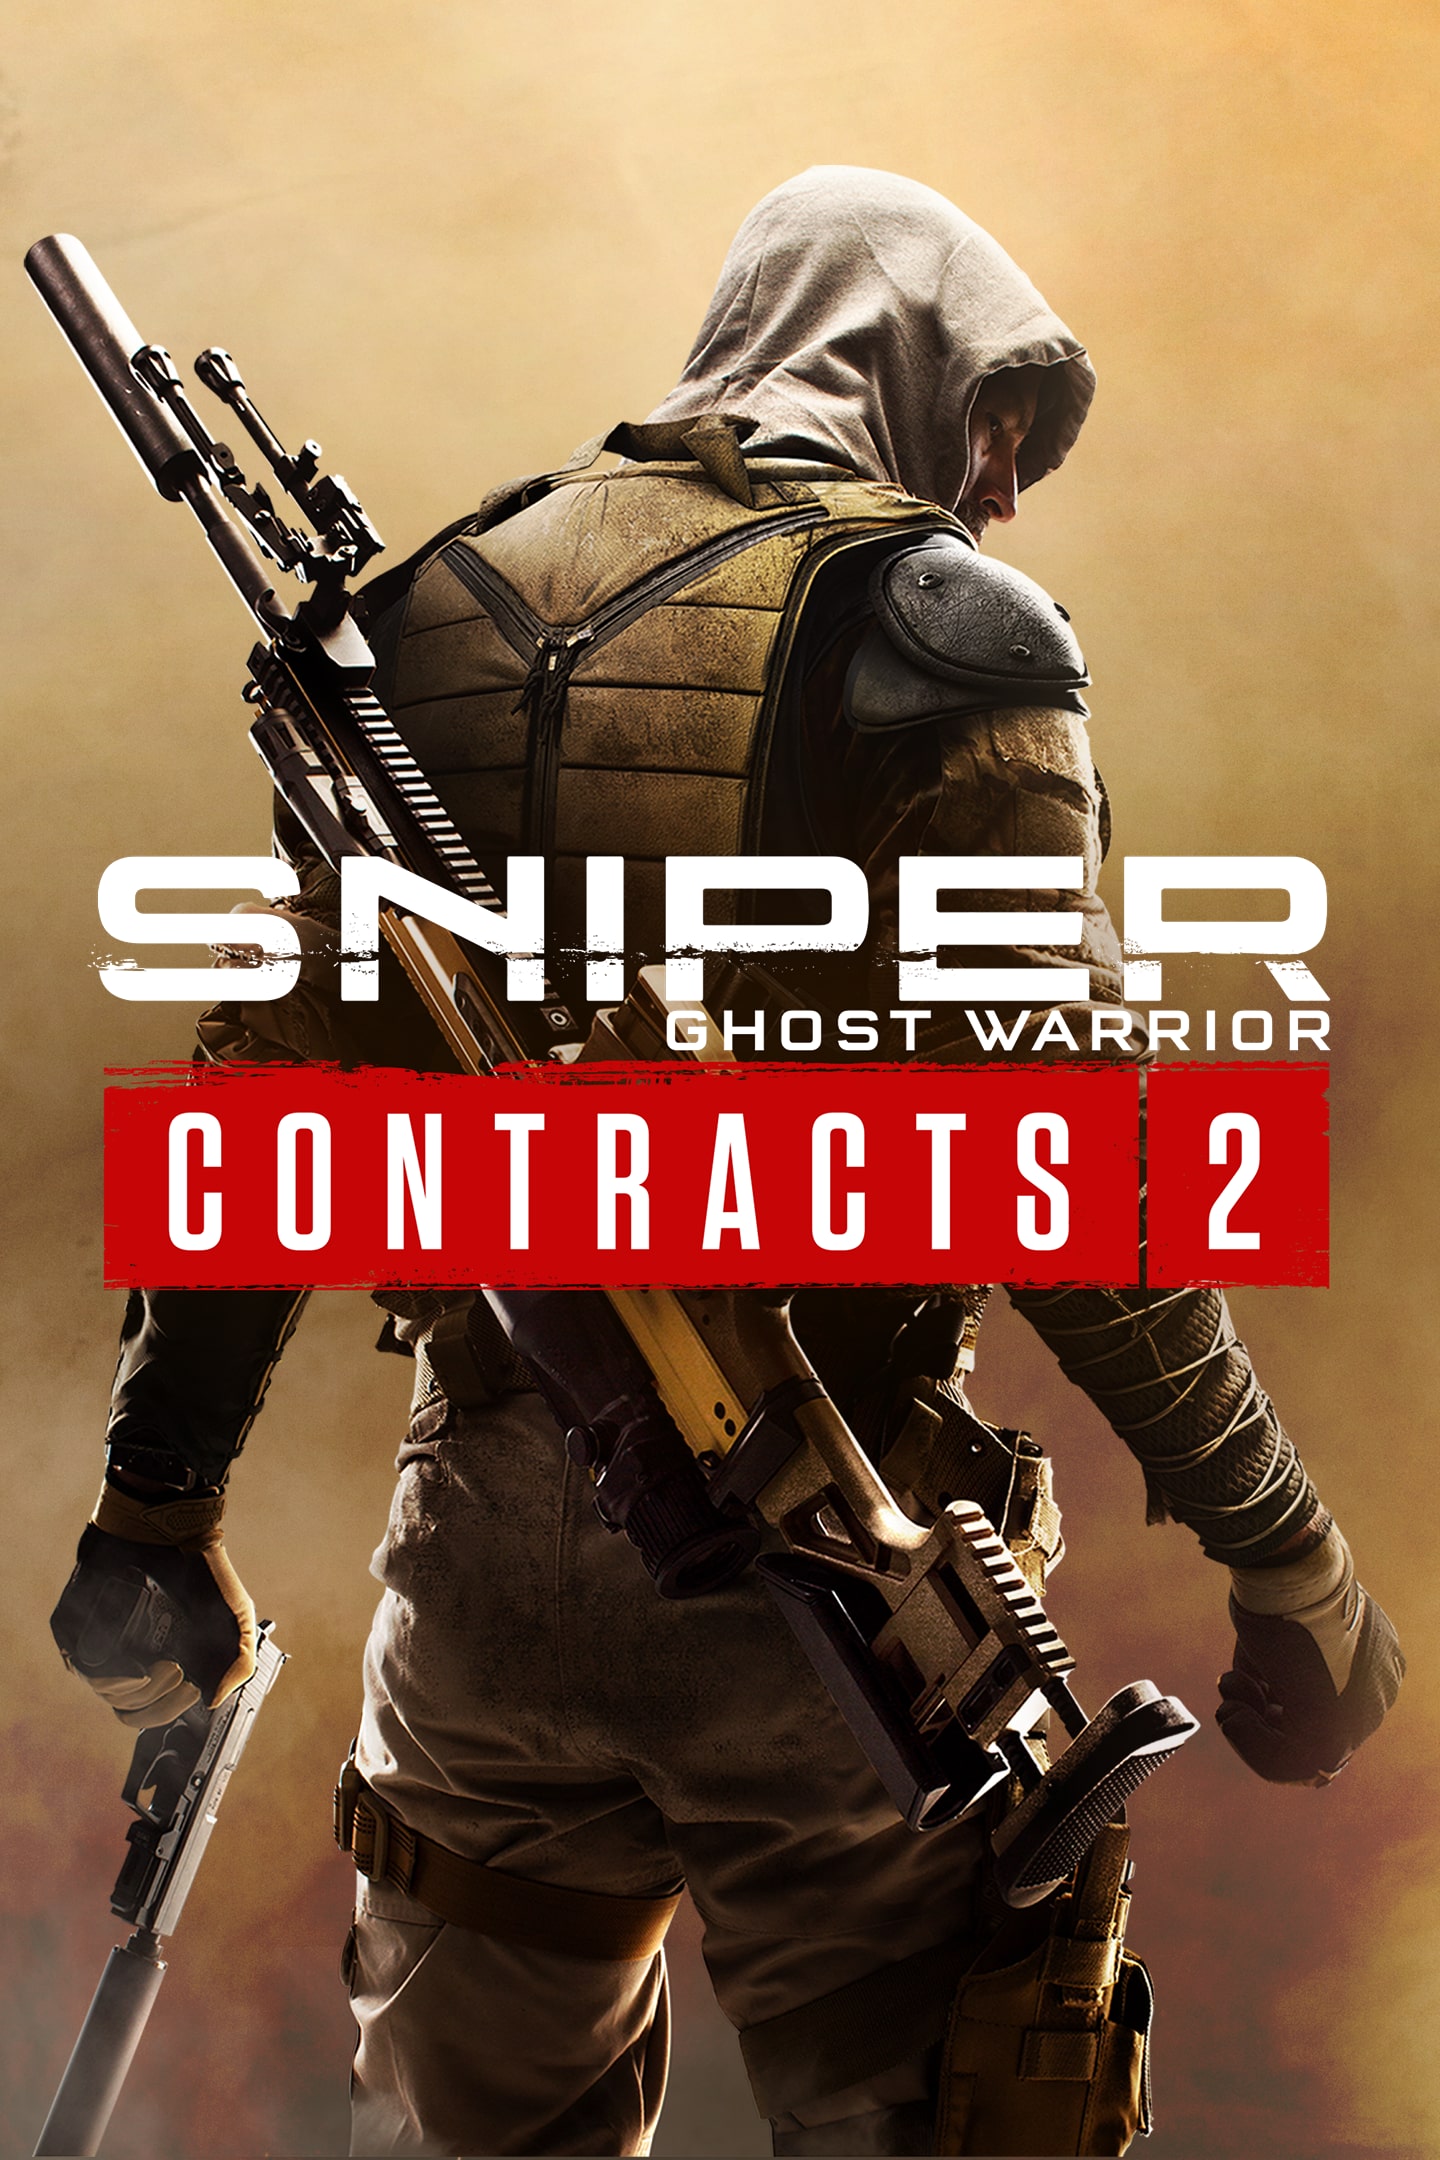 Sniper Ghost Warrior Contracts 2 (スナイパーゴーストウォリアー 